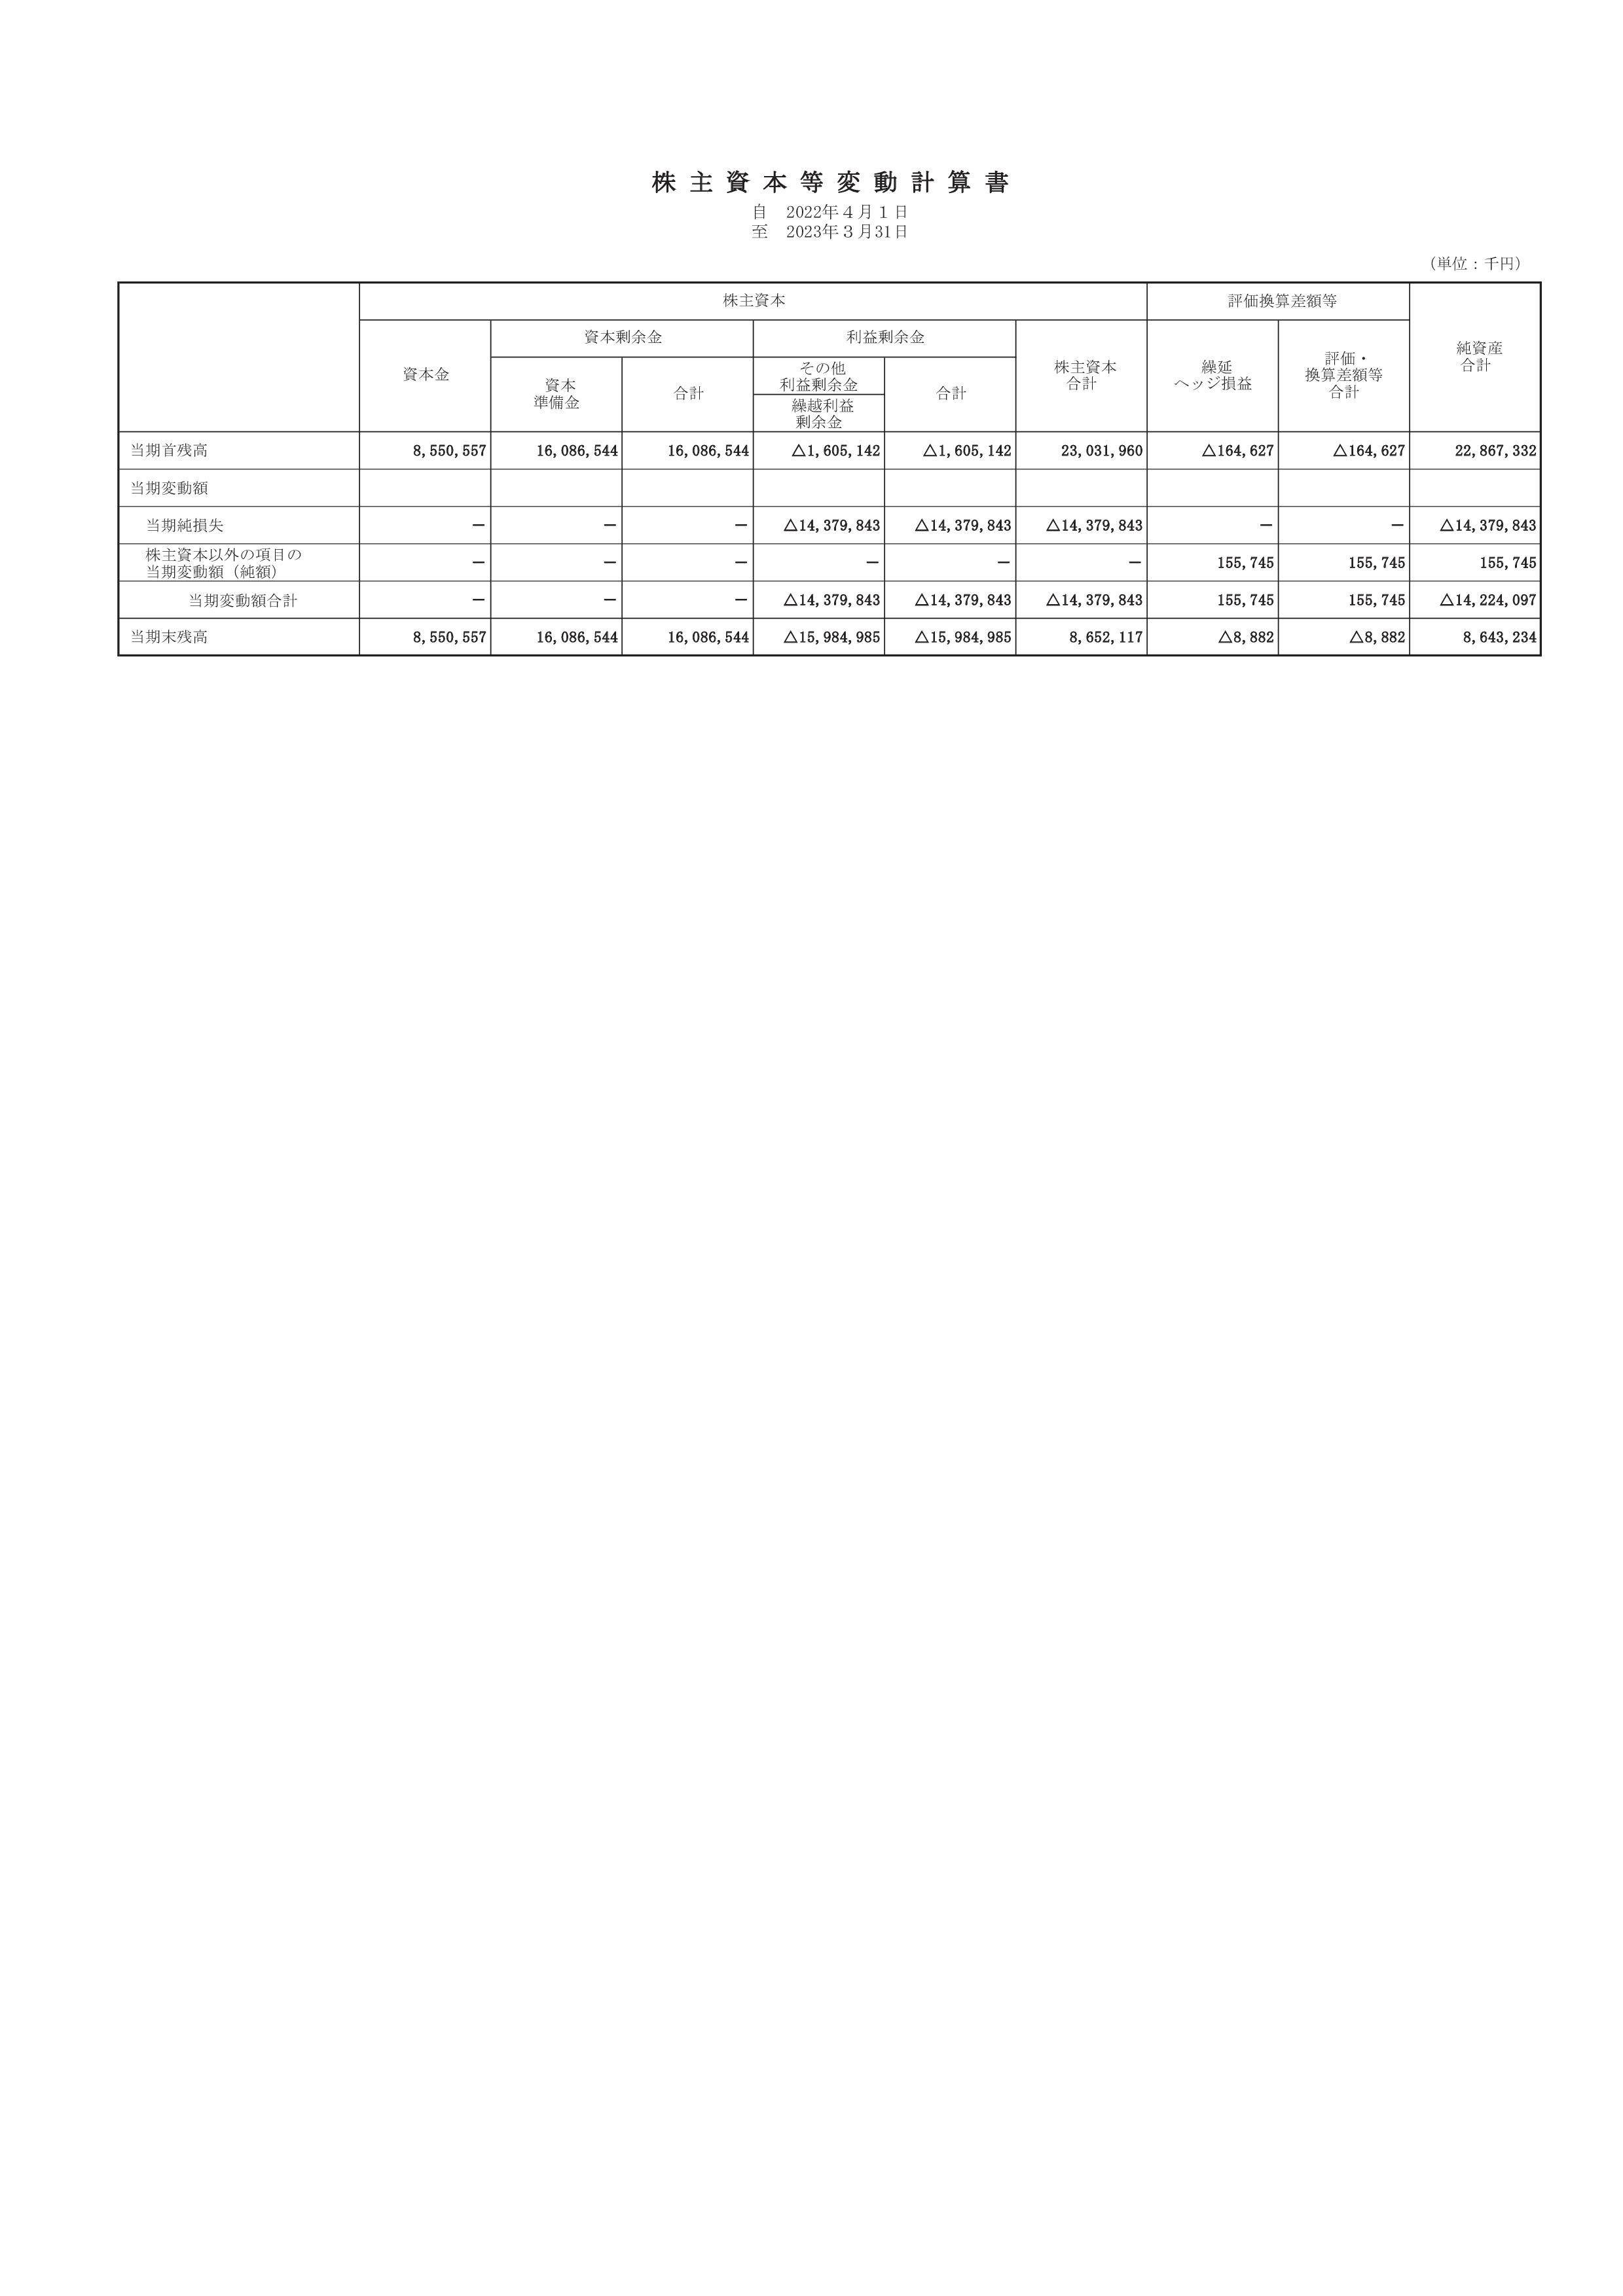 Period 84 Financial Statement (for fiscal year ended March 2023) page 3